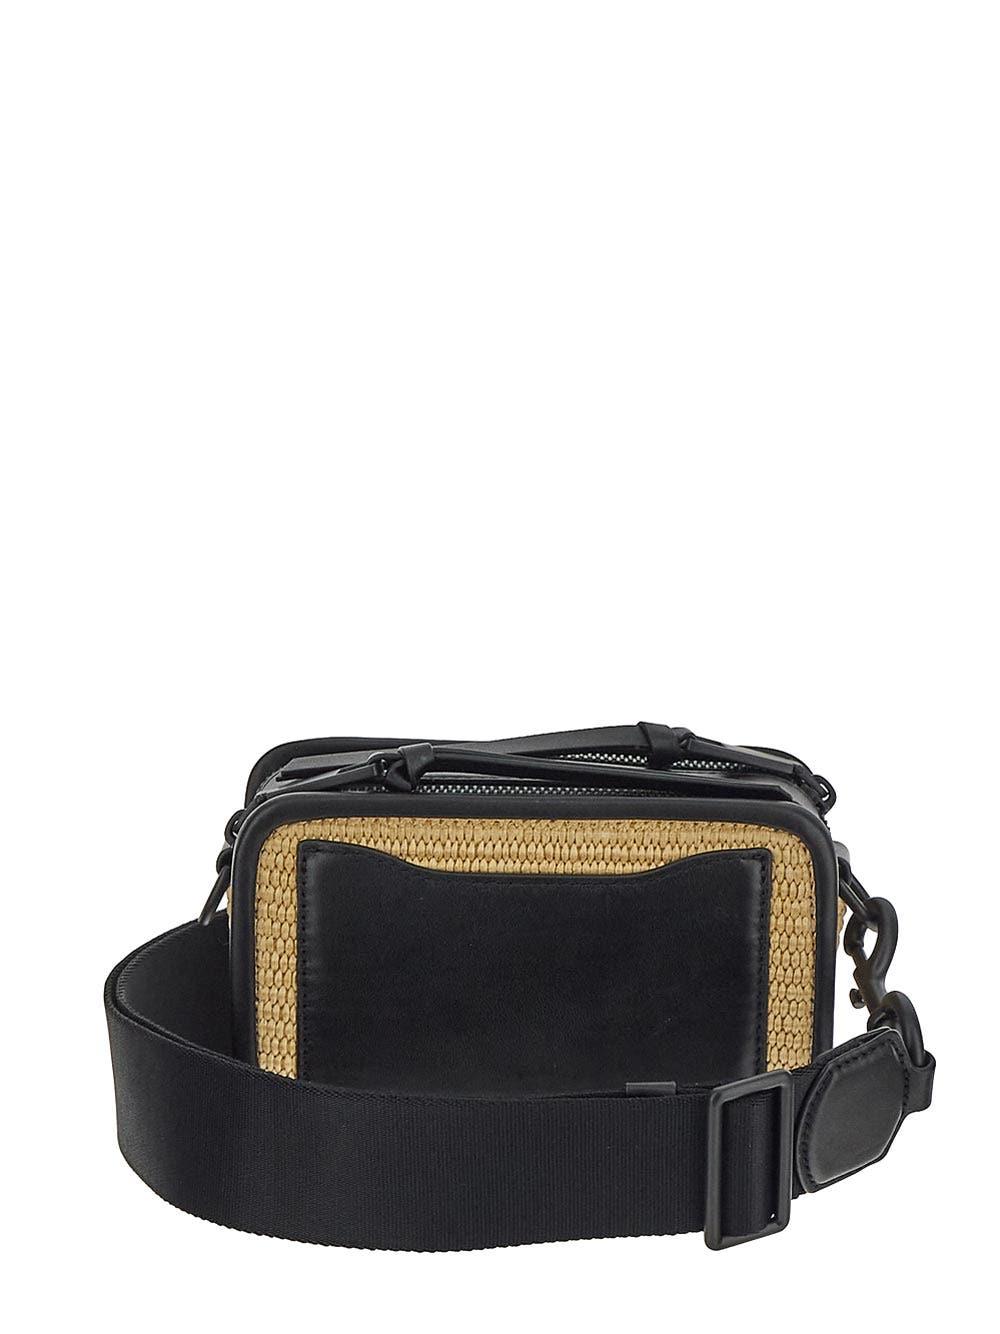 Marc Jacobs The Woven Dtm Snapshot Camera Bag in Black